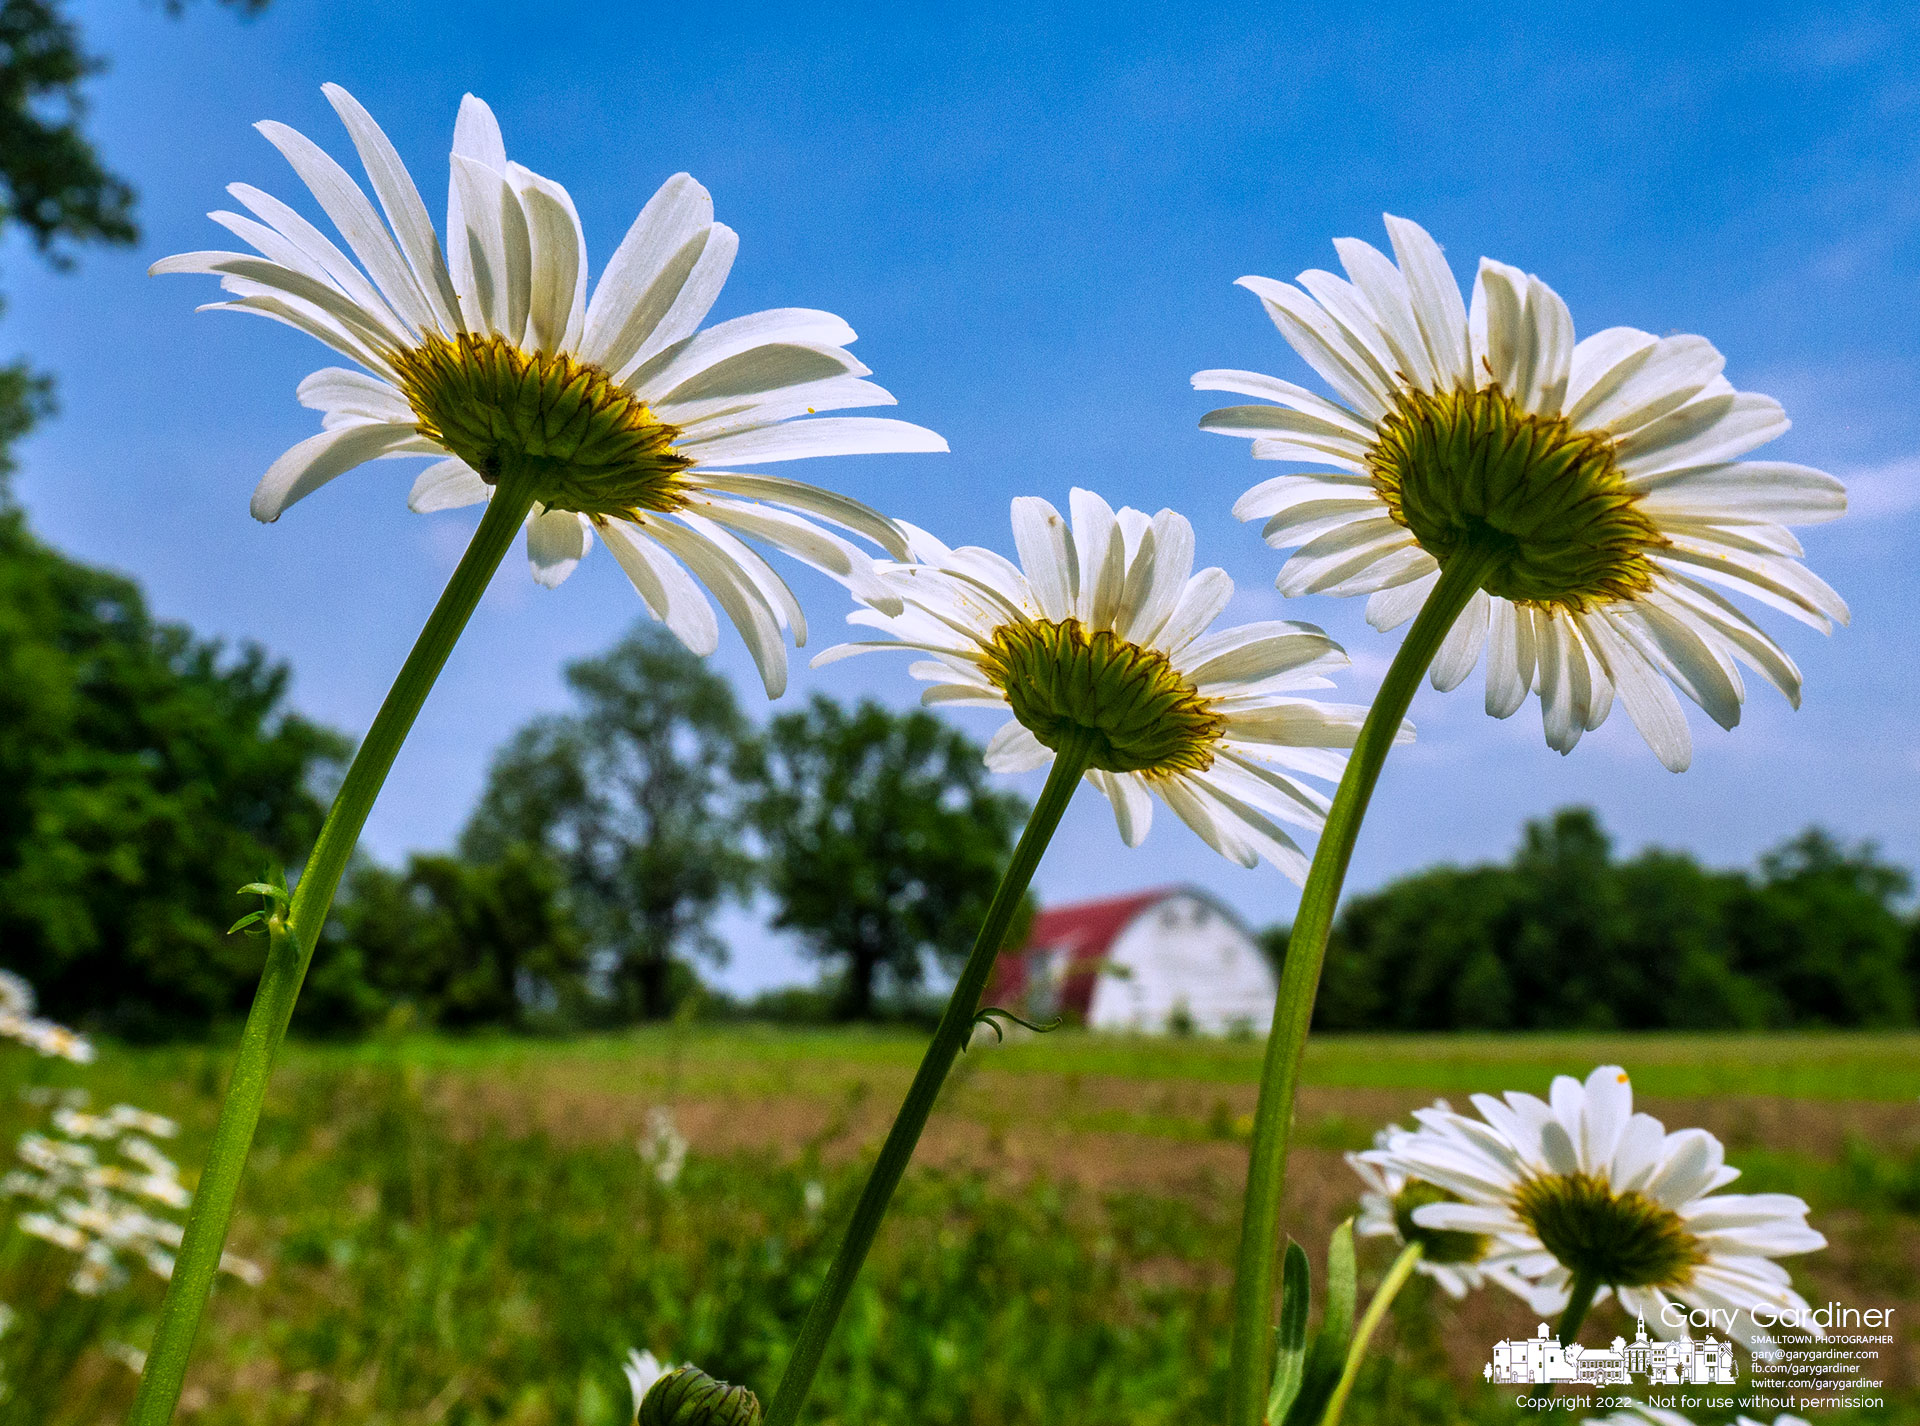 Wild daisies stretch to the morning sun from the edge of a freshly planted field of soybeans on the Braun Farm in Westerville. My Final Photo for June 7, 2022.